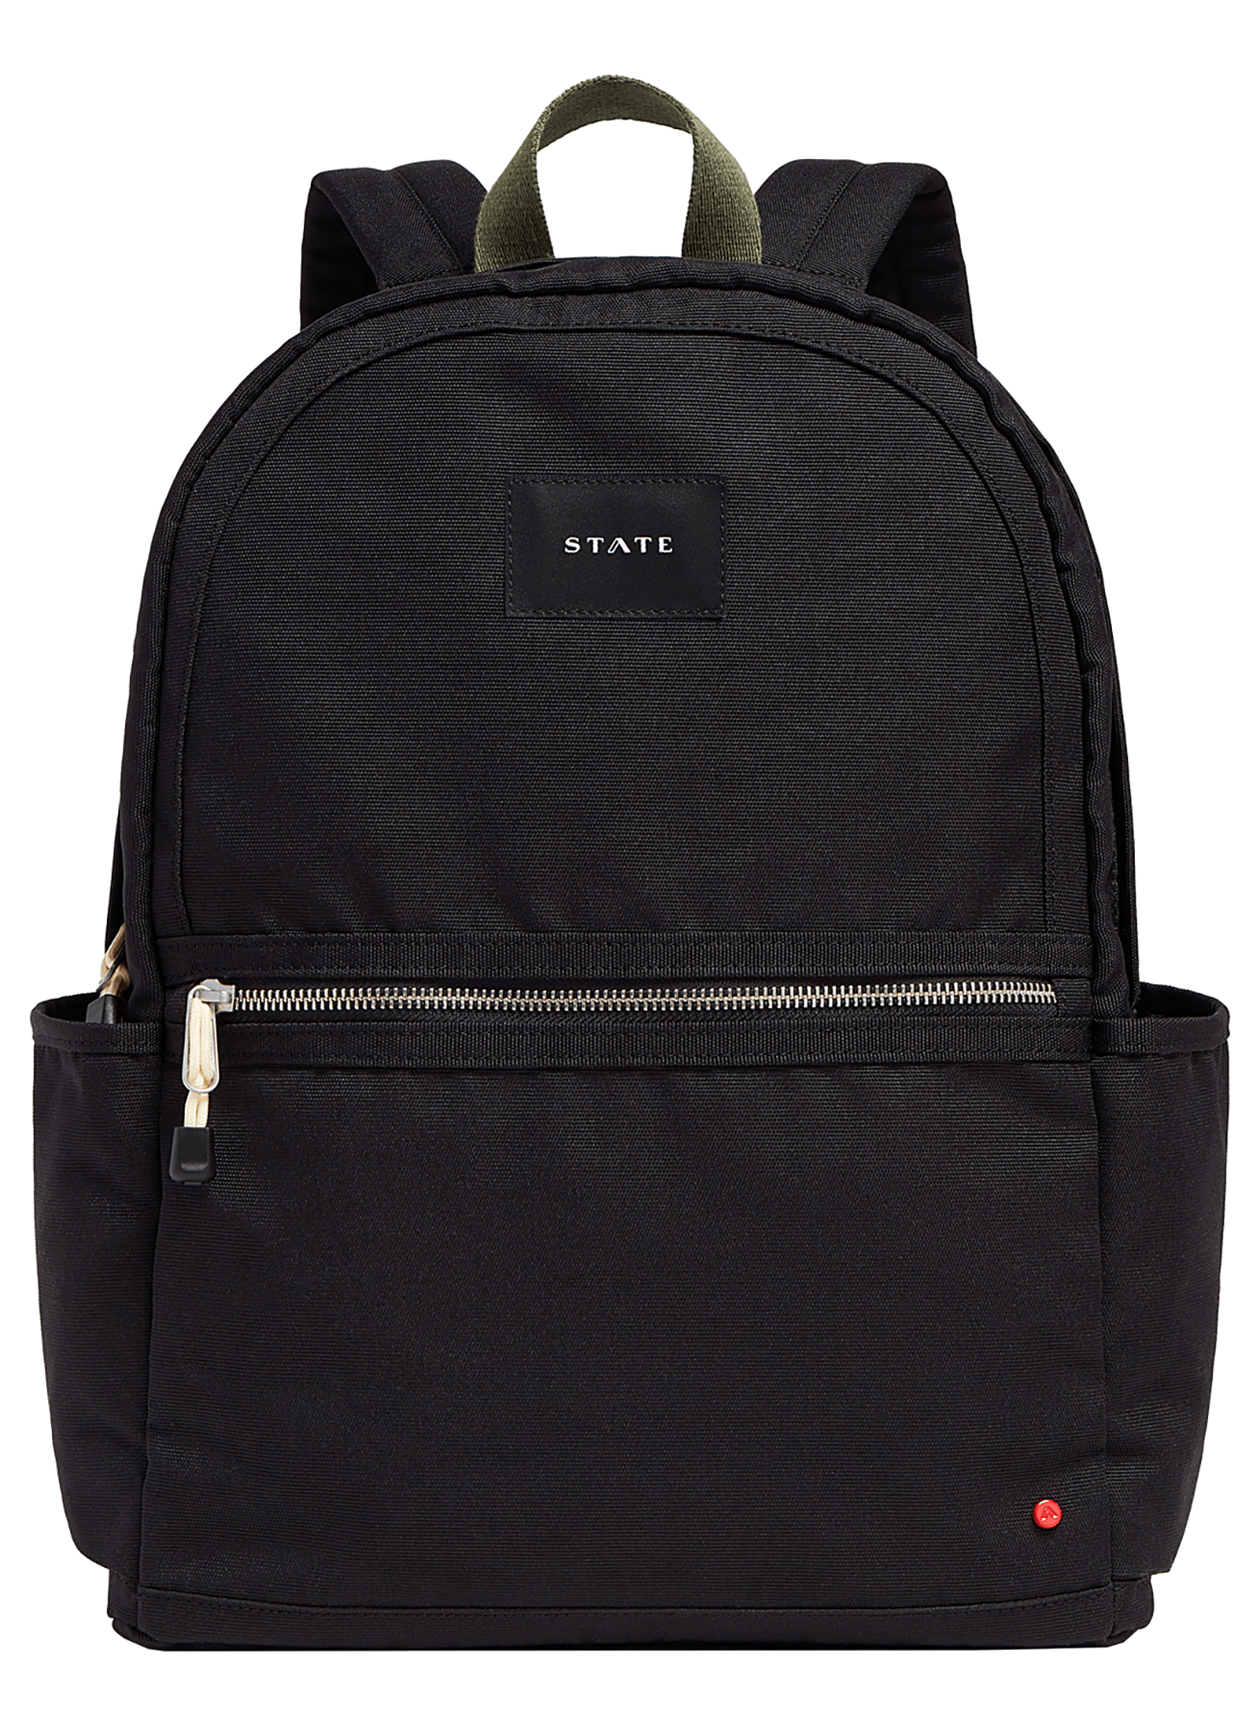 STATE Bags X1061385 - Kane Large Double Pocket Polycanvas Backpack